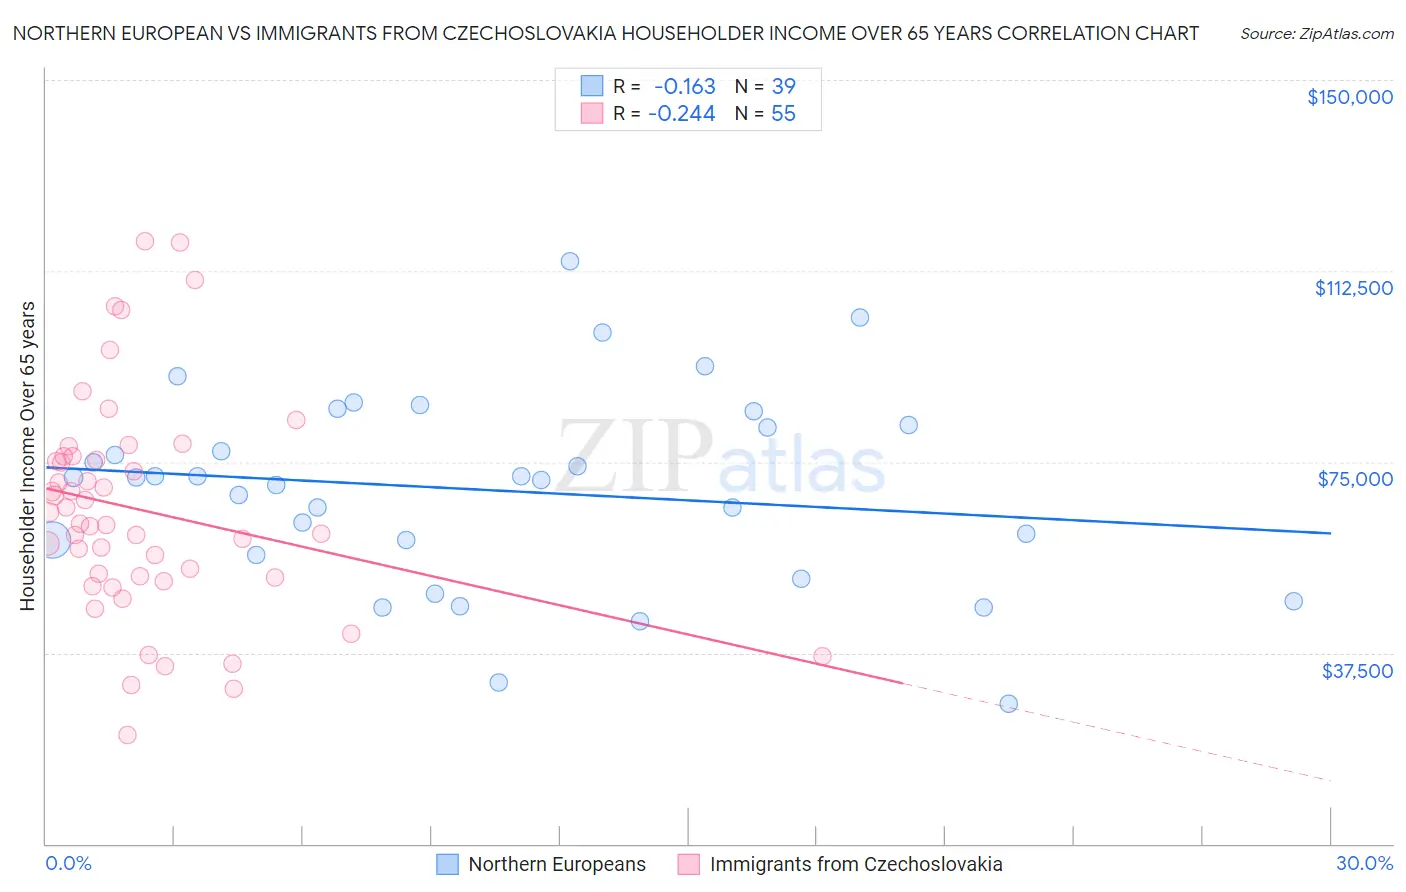 Northern European vs Immigrants from Czechoslovakia Householder Income Over 65 years